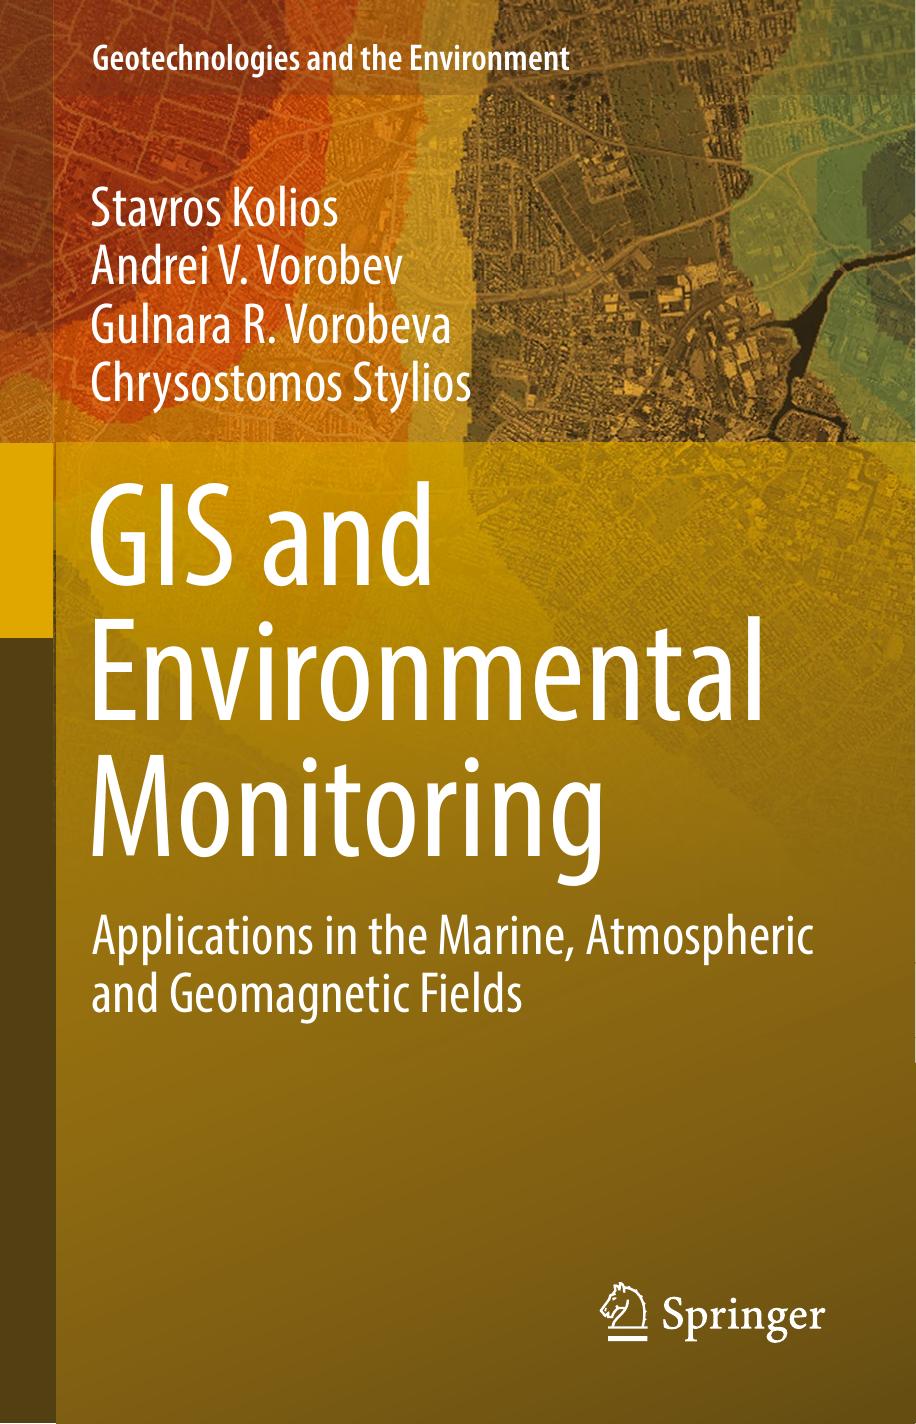 GIS and Environmental Monitoring Applications in the Marine, Atmospheric and Geomagnetic Fields 2017